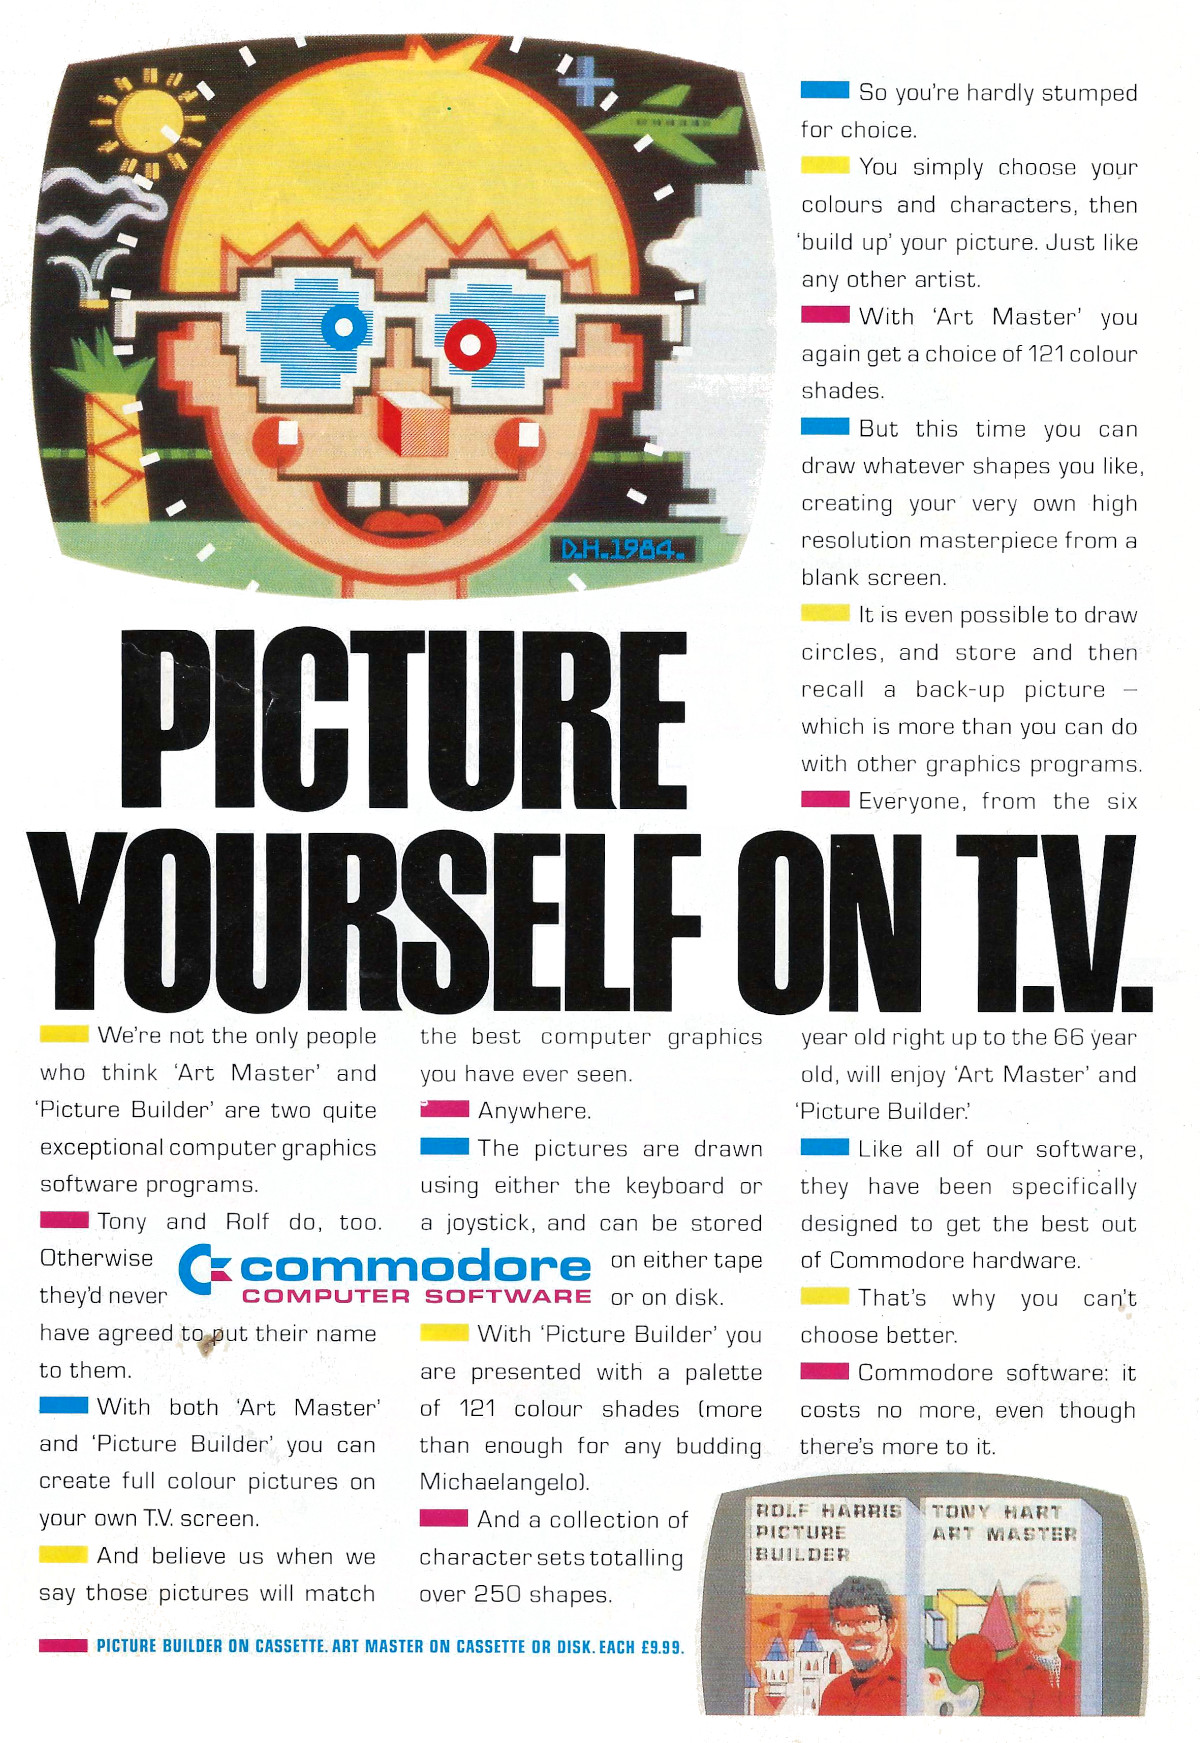 A Commodore Computer Software advert showing Rolf Harris's Picture Builder and Tony Hart's Art Master. From Commodore Computing International, November 1984